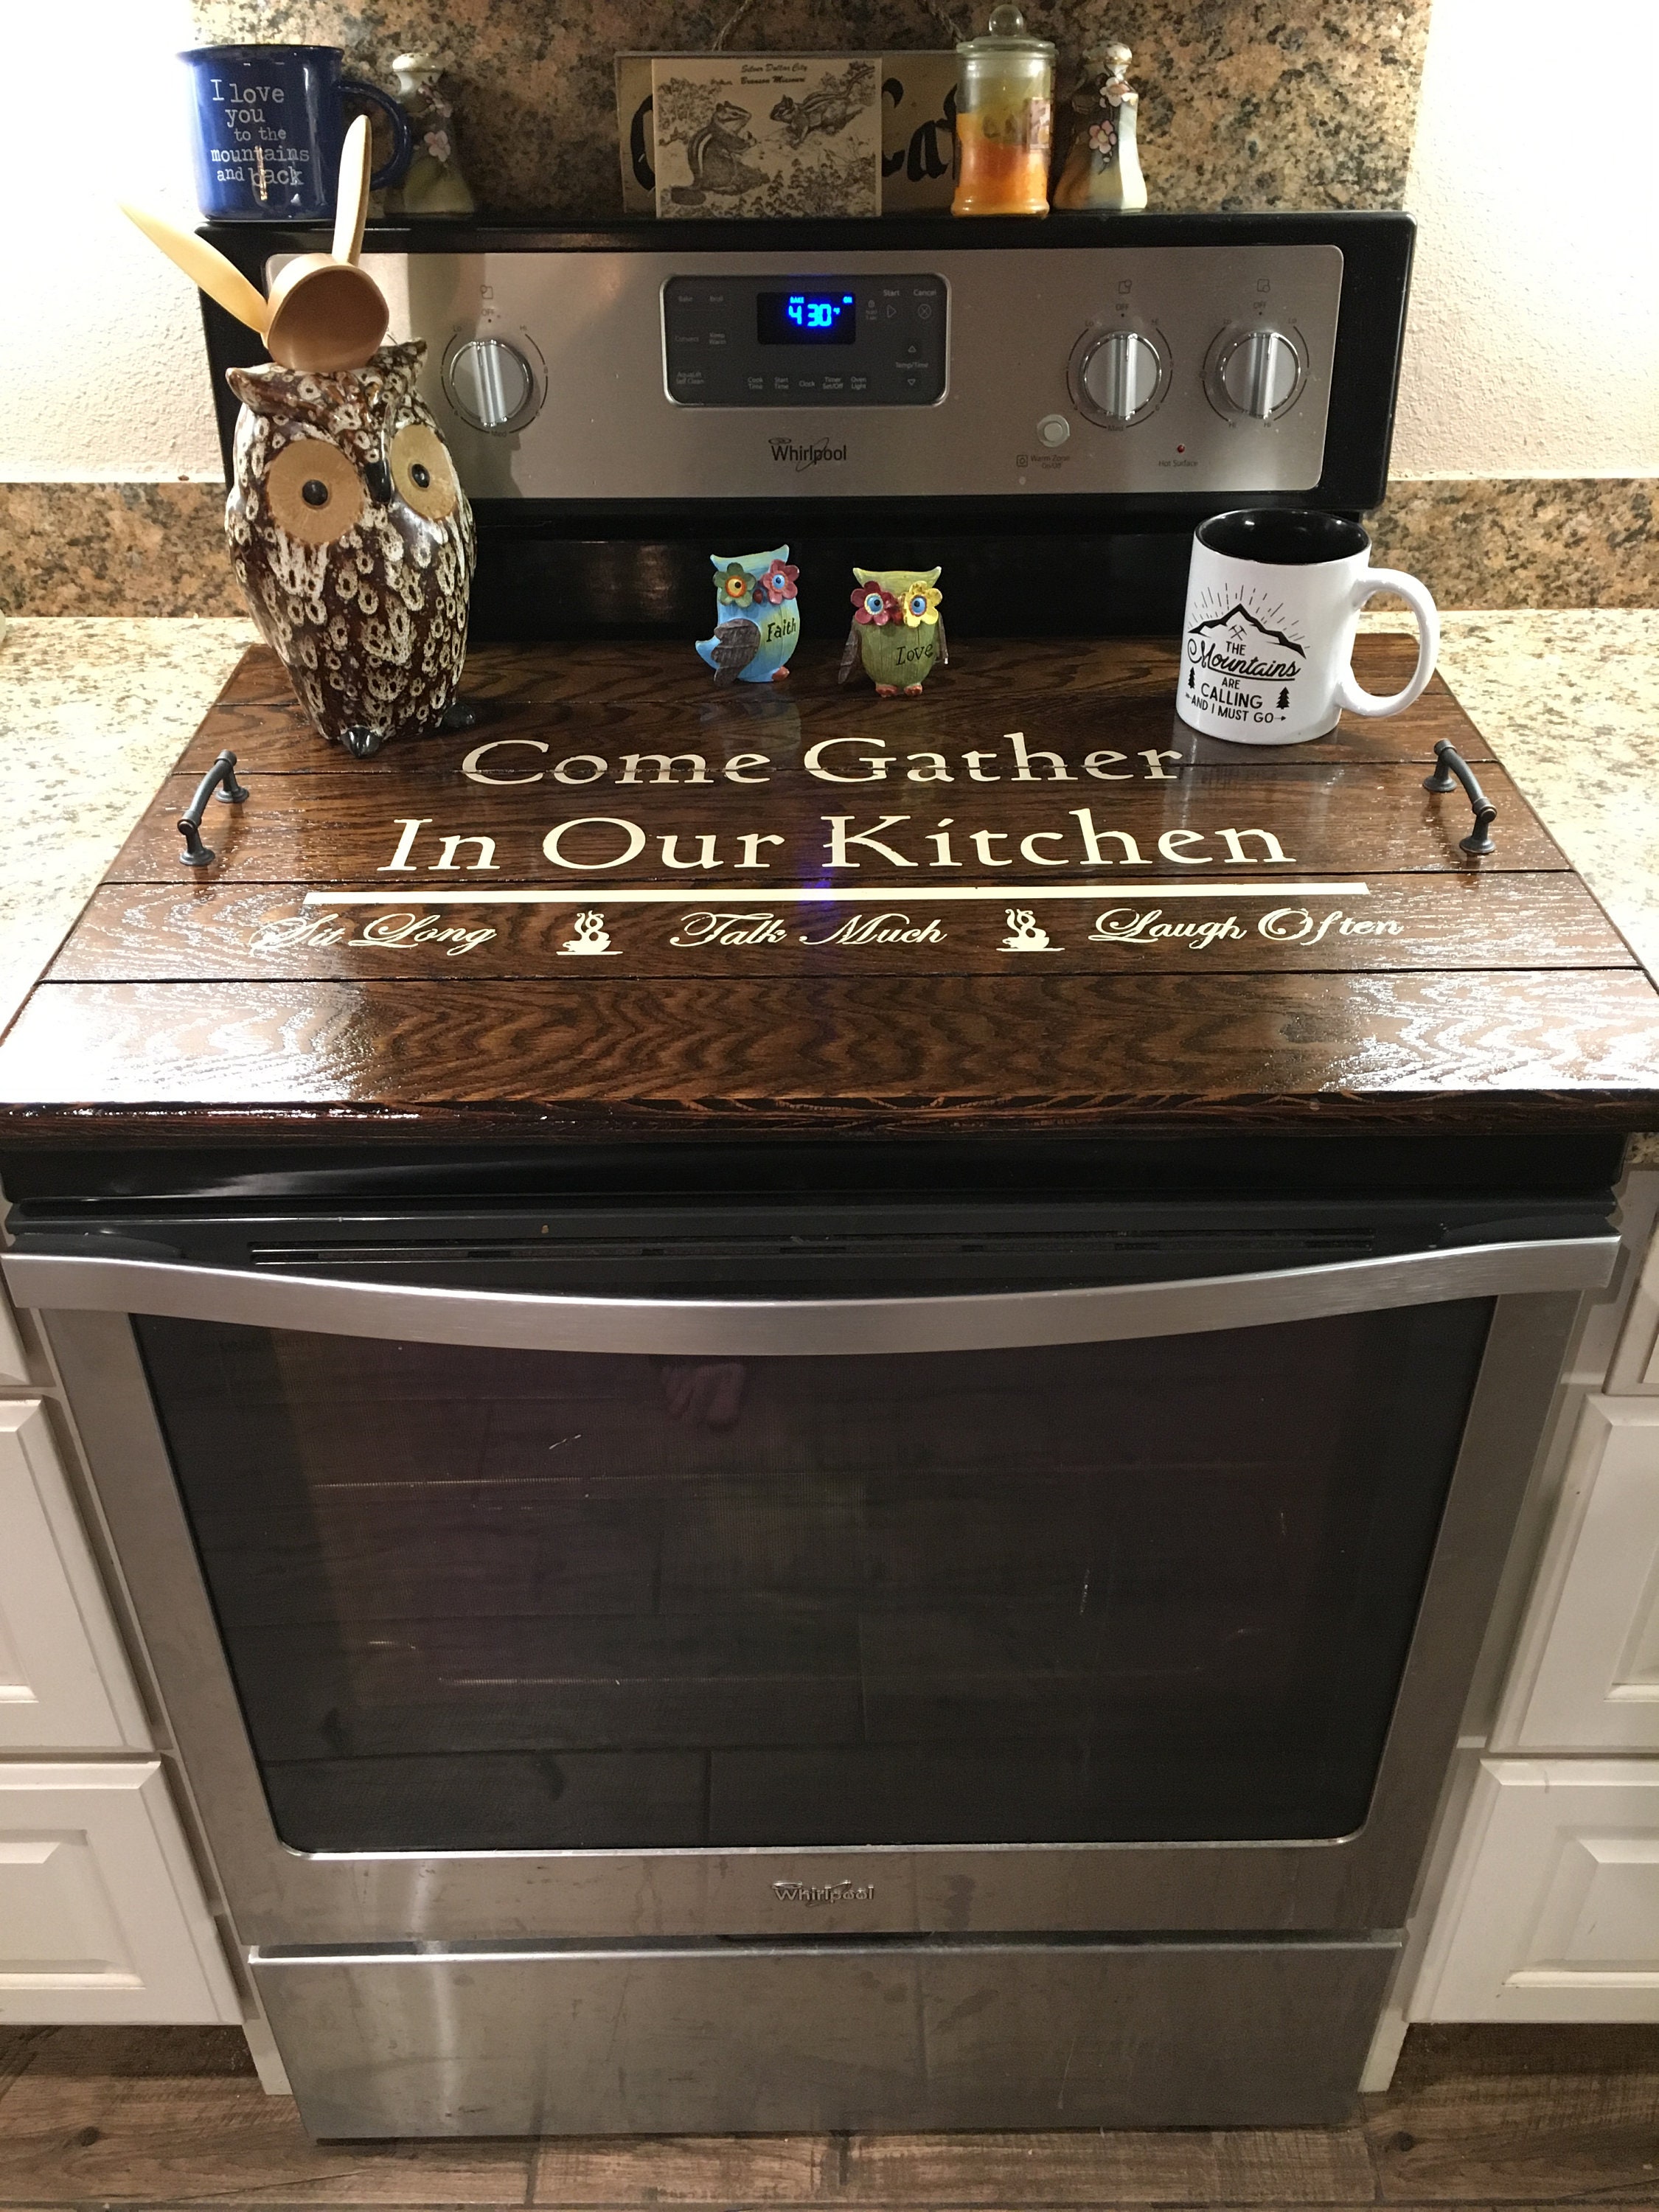 Custom-Sized Stove Mat Protector for Glass Cook Tops (when burners